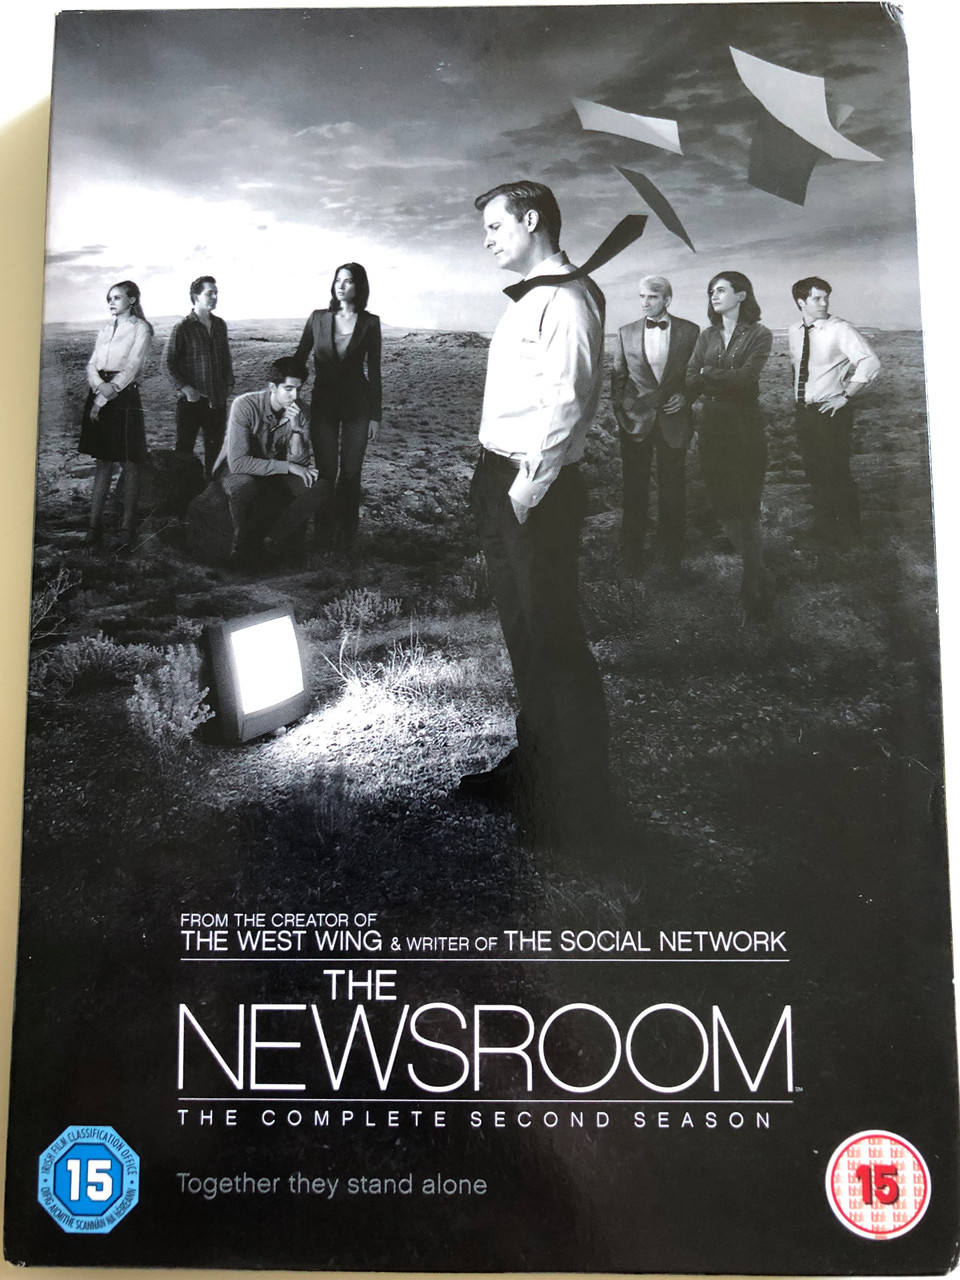 The Newsroom Dvd 2014 The Complete Second Season Created By Aaron Sorkin A Hbo Original 